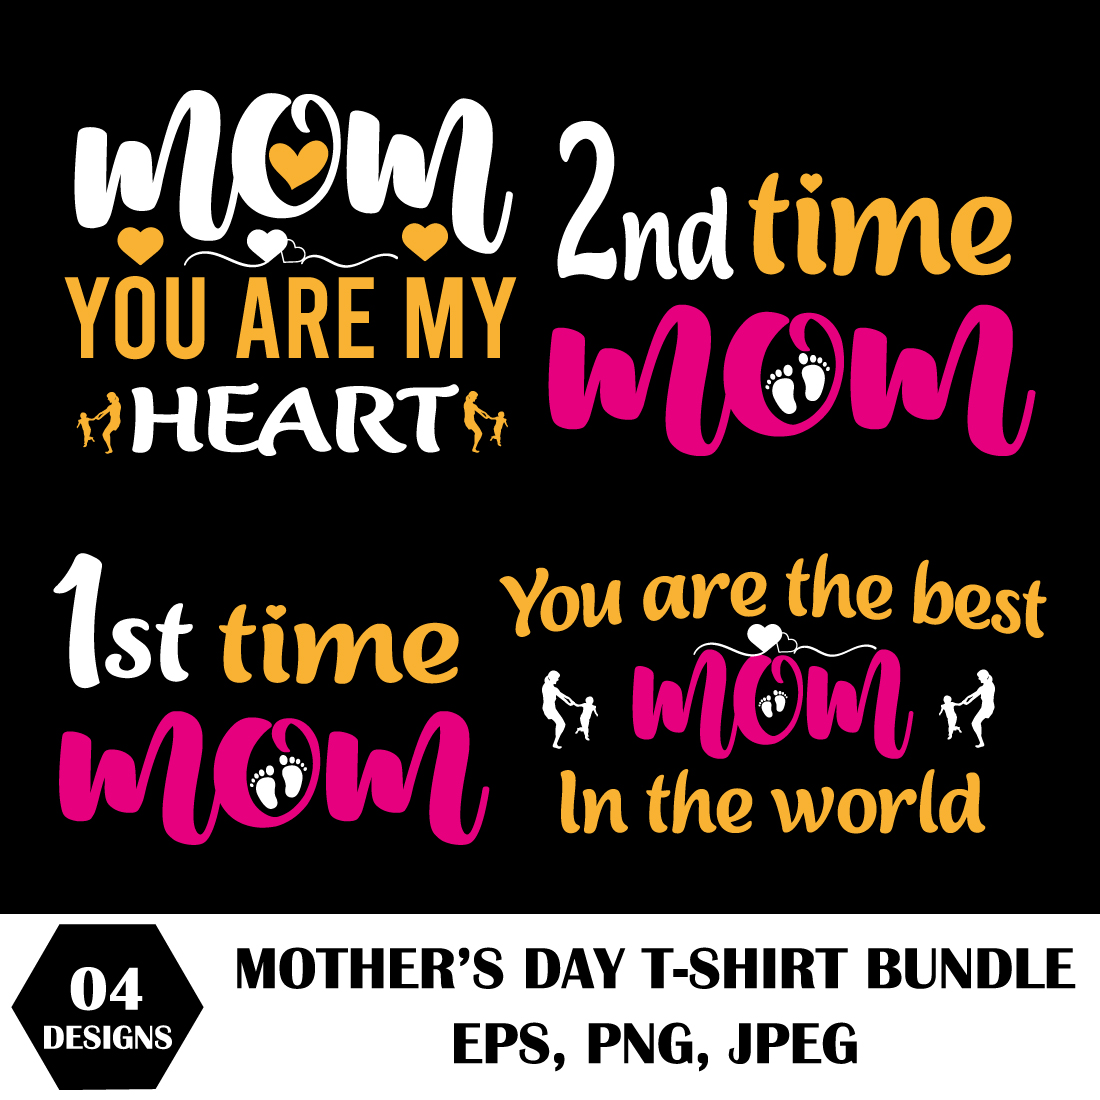 Mother's day t-shirt bundle preview image.